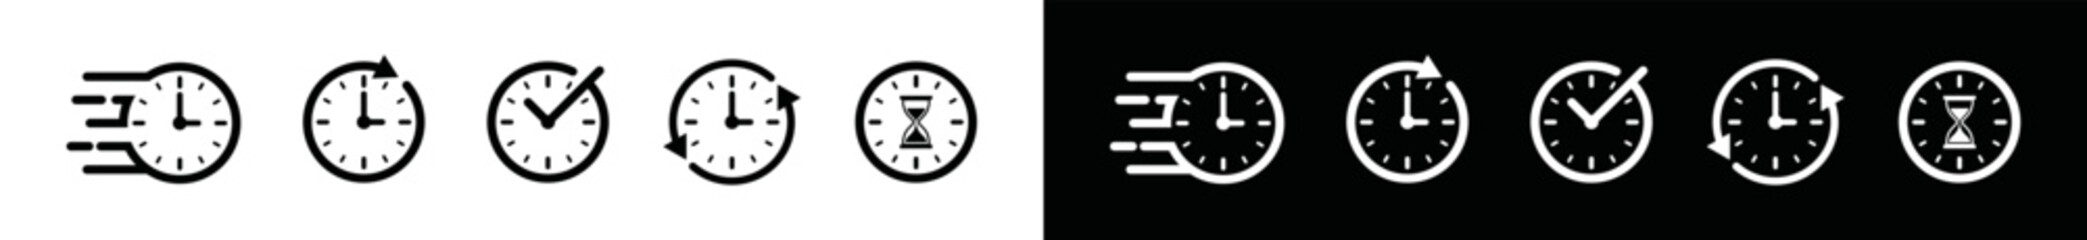 Quick time icon. Speed or moving time icon vector. Reload times, Check time and hourglass in the clock symbol illstration